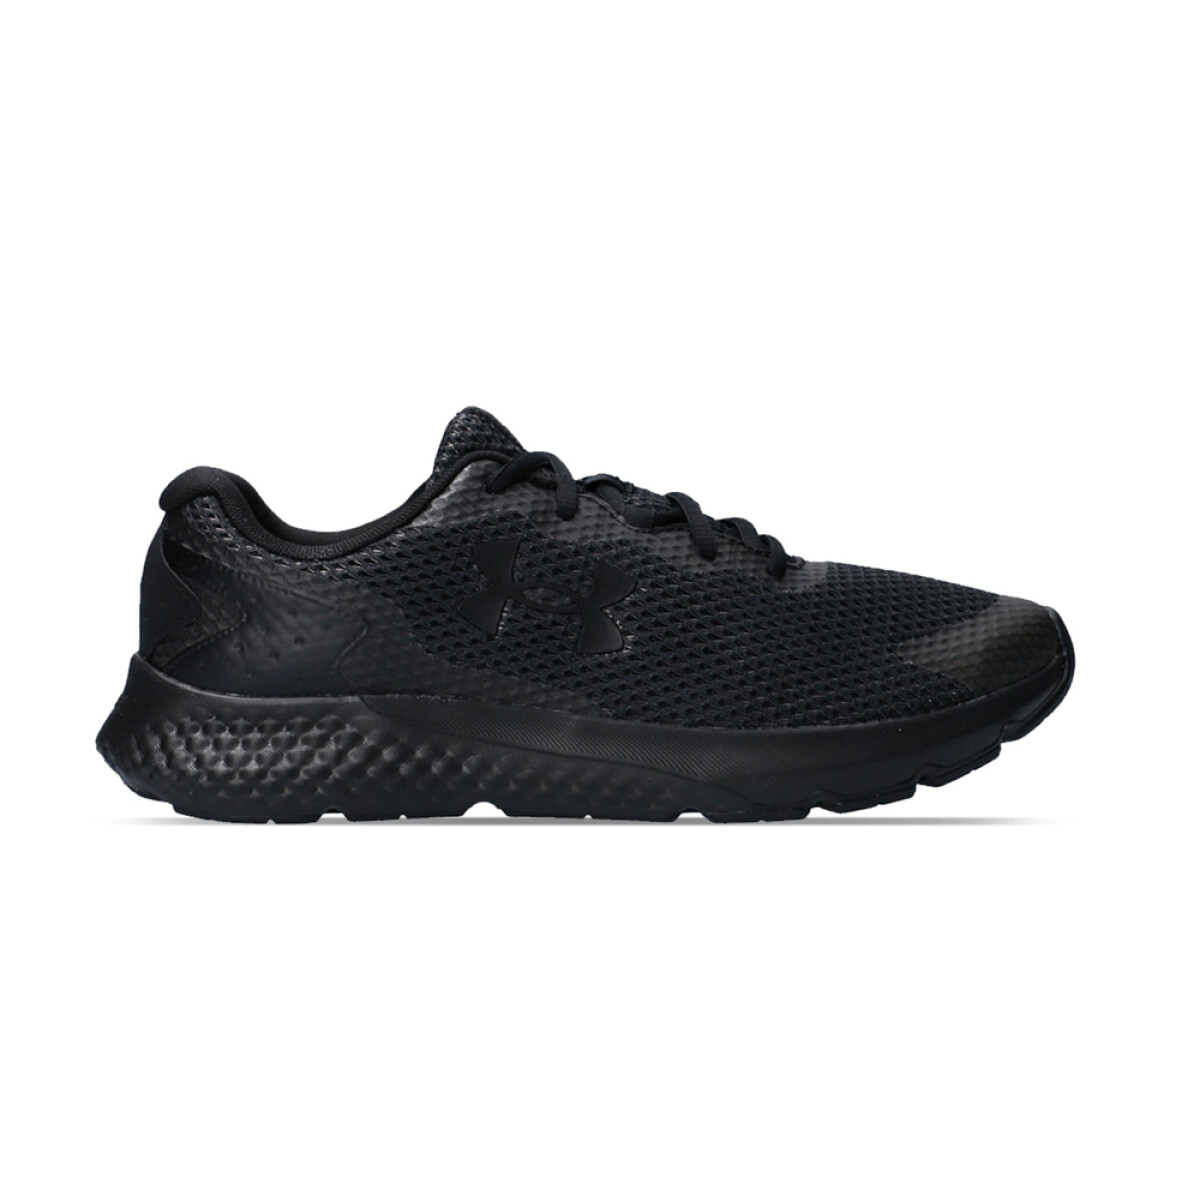 Under Armour Charged Rogue 3 - Black 